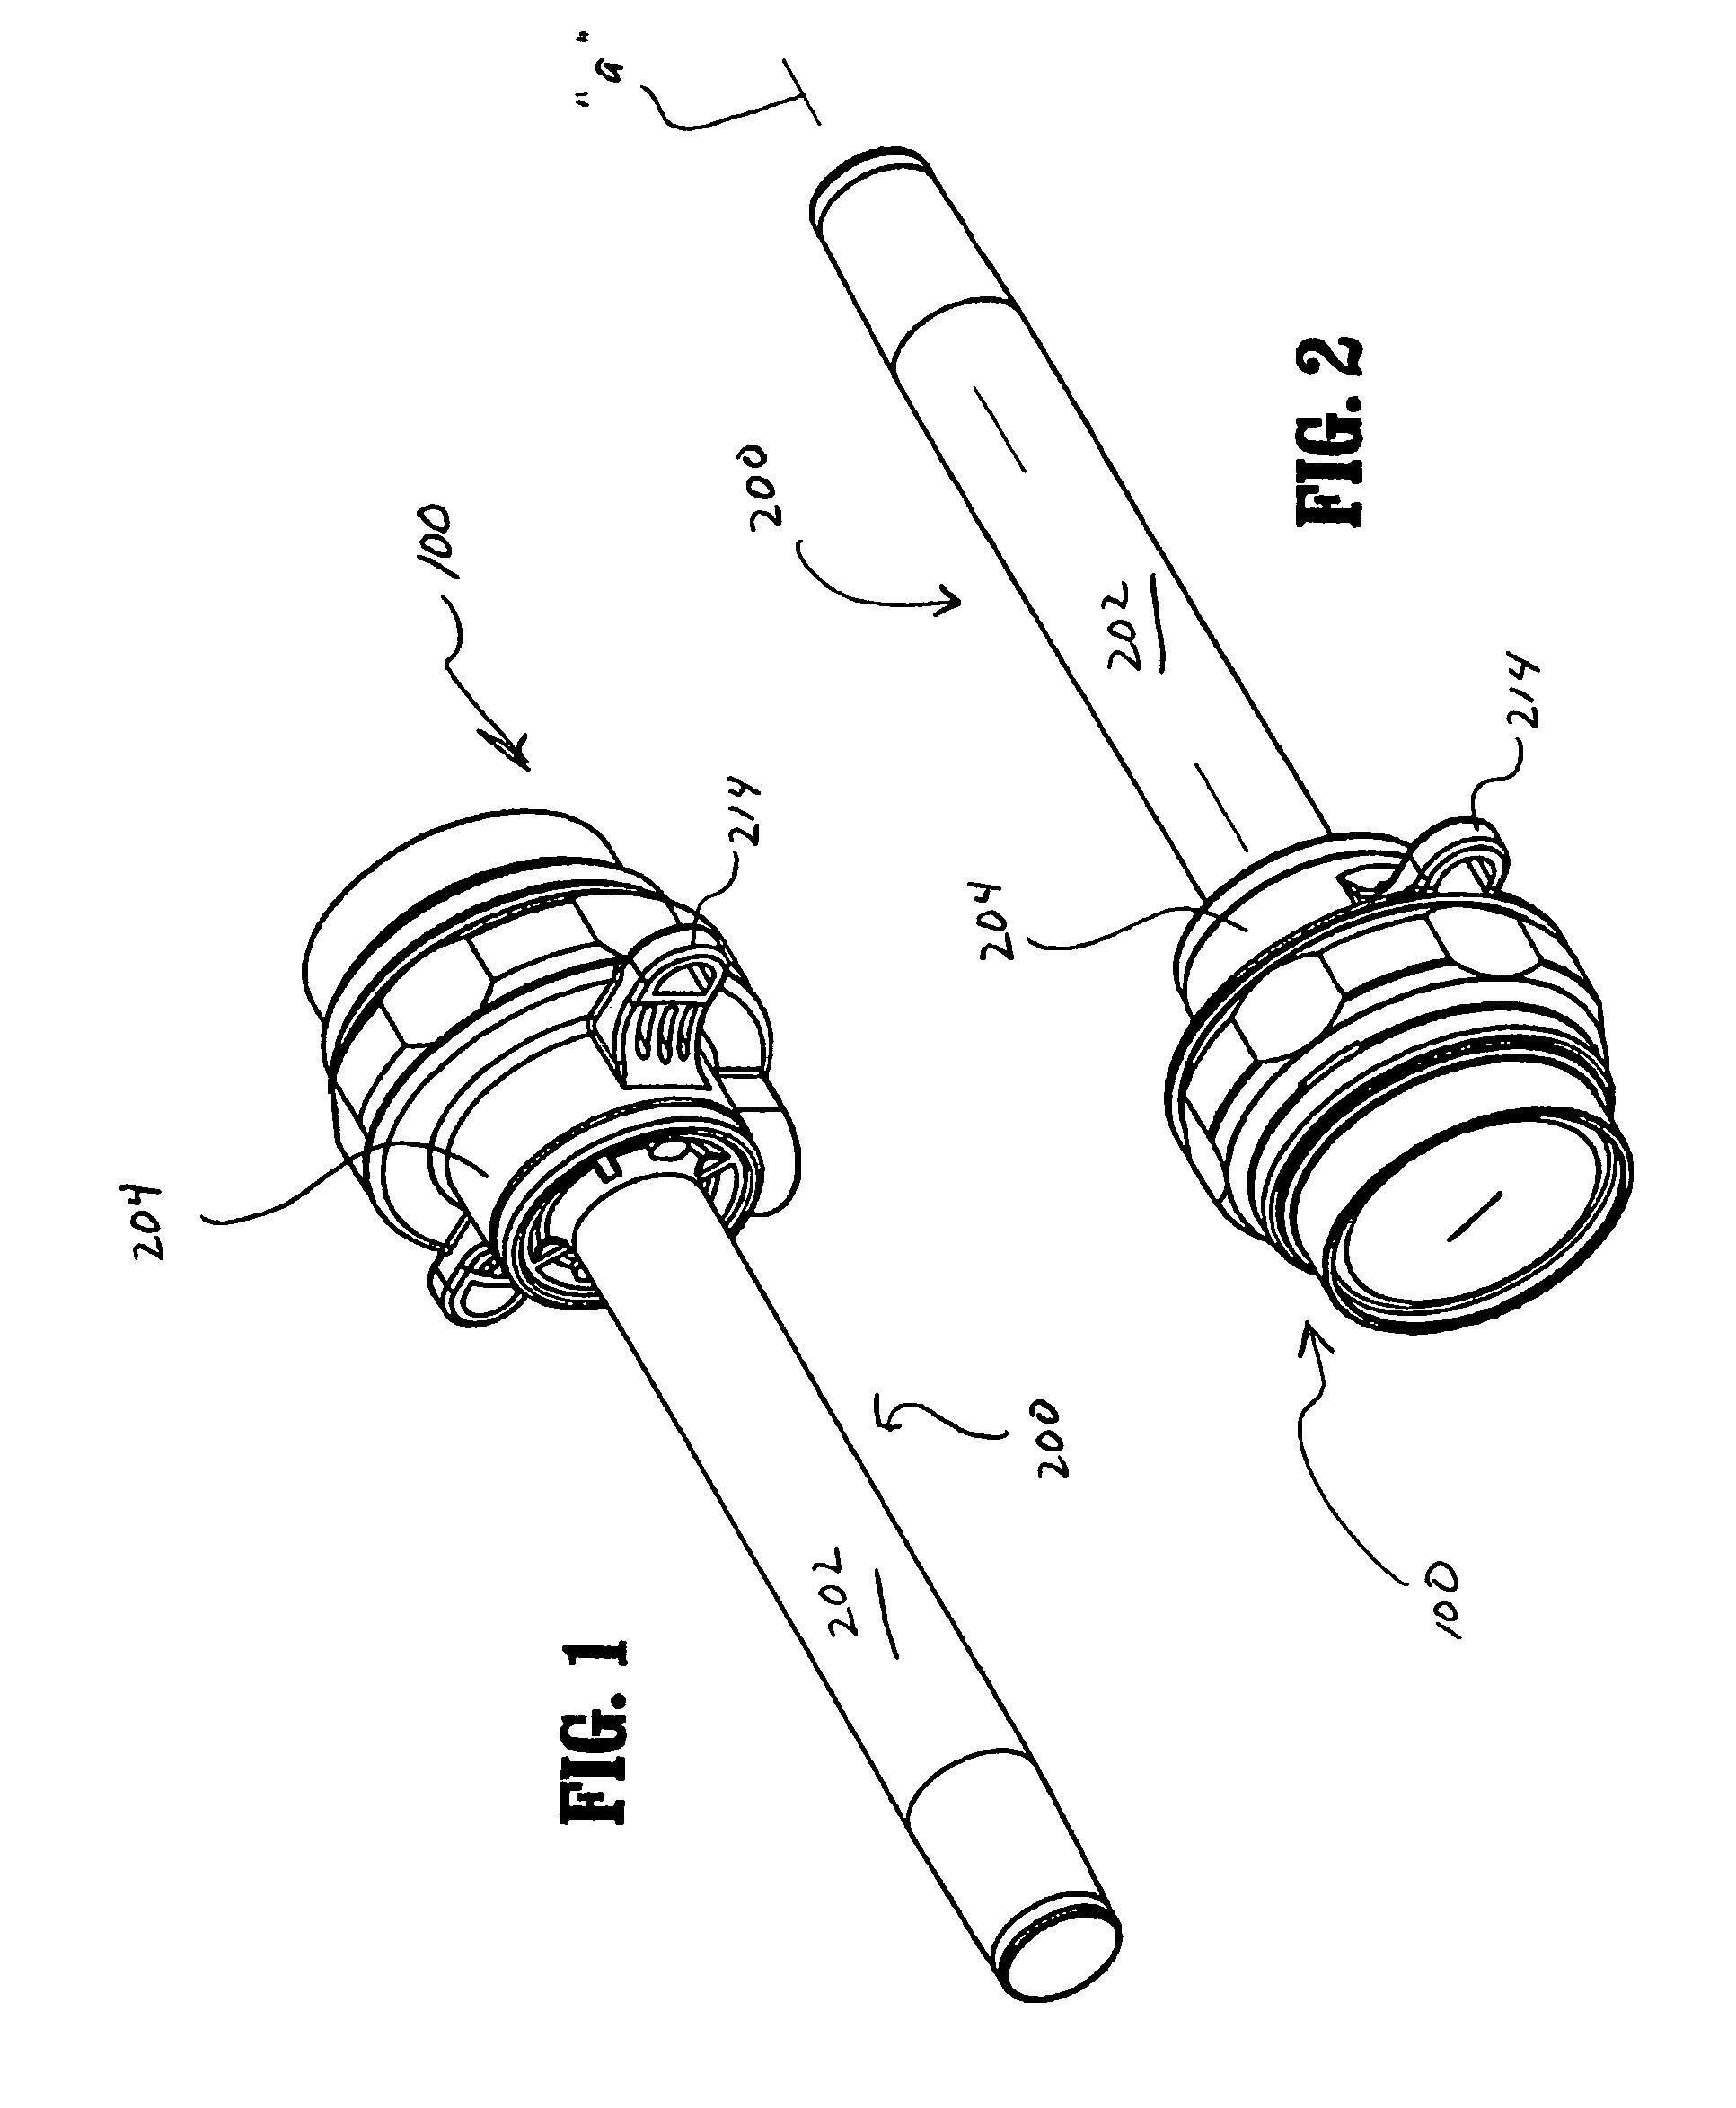 Gel seal for a surgical trocar apparatus